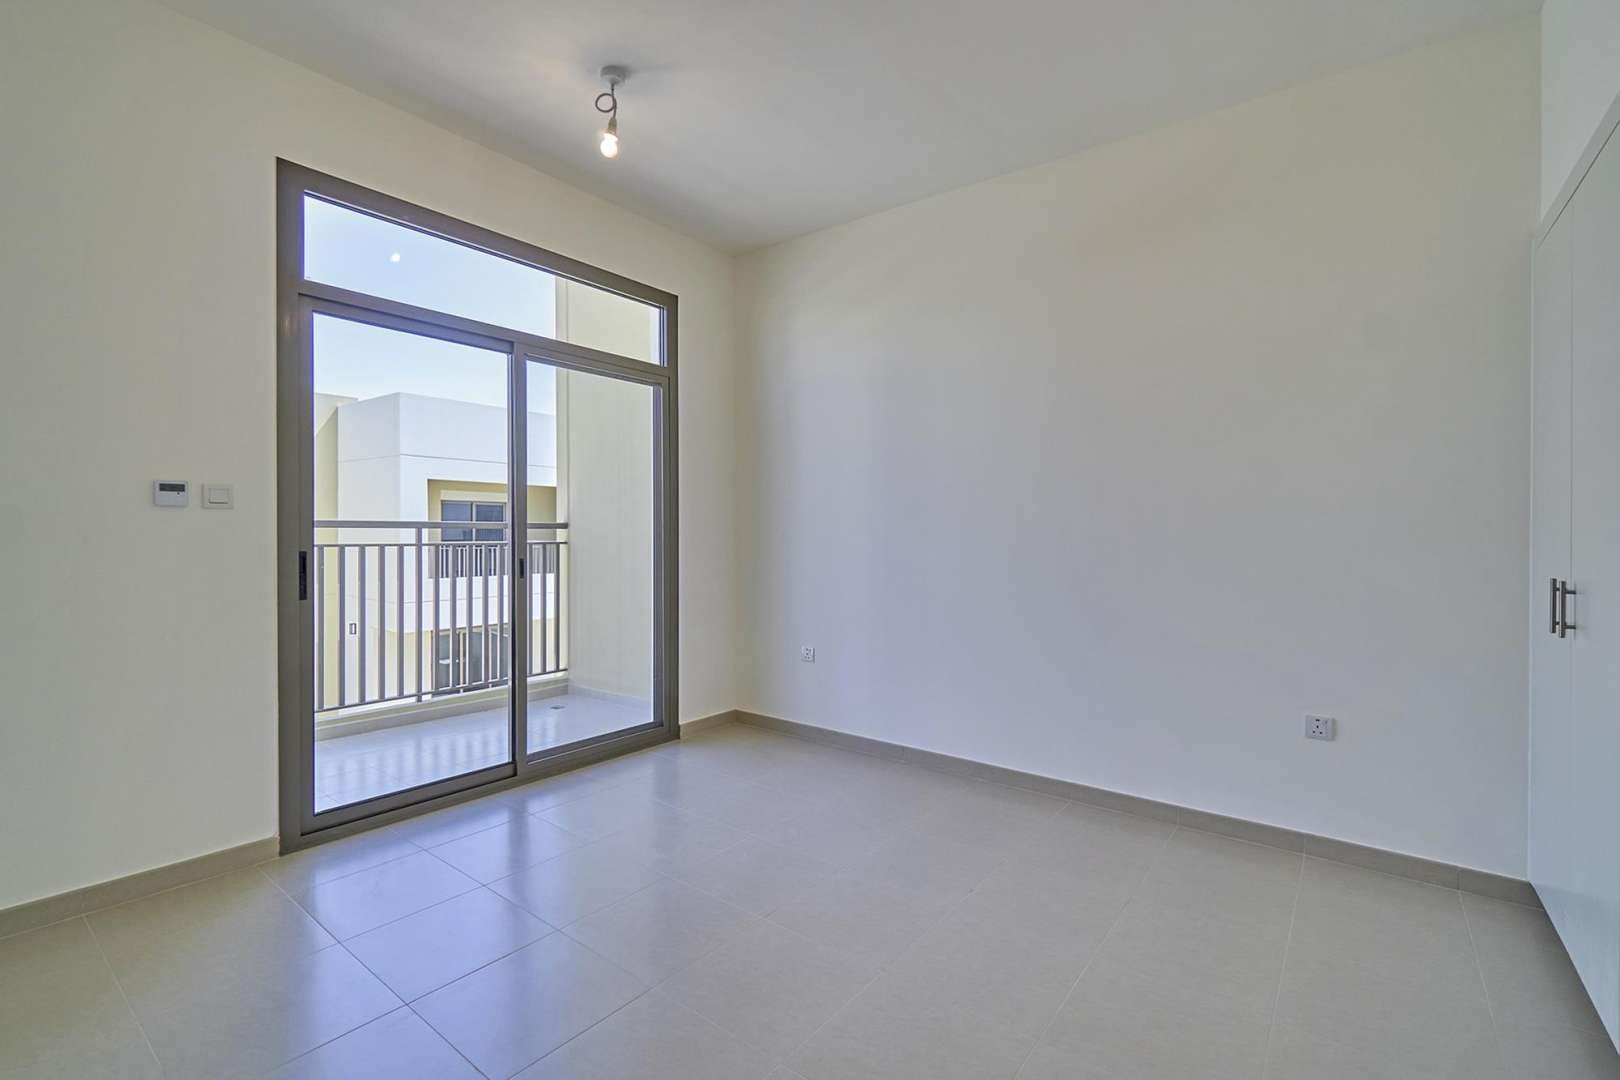 3 Bedroom Townhouse For Sale Naseem Townhouses Lp06278 2bb5a875f01a7c00.jpg